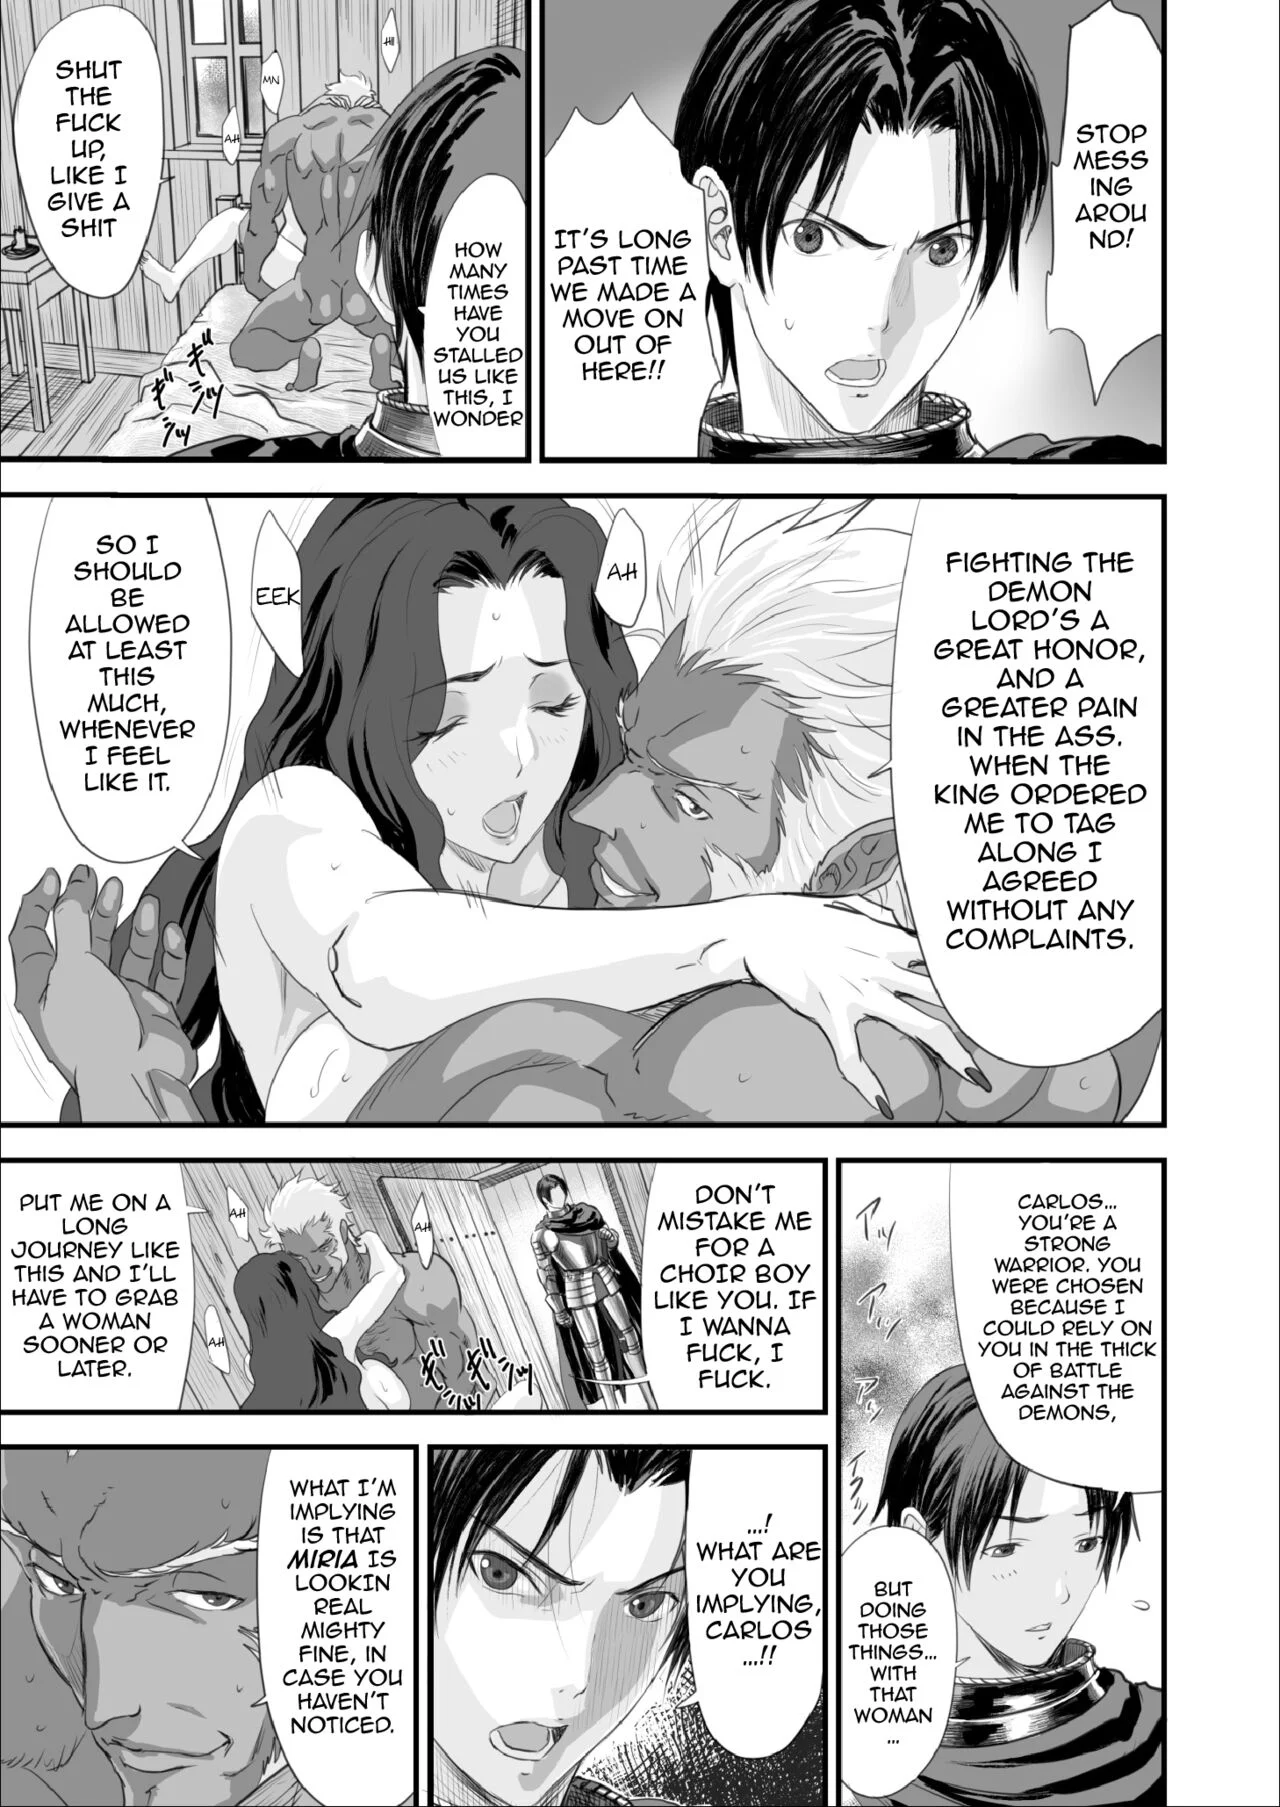 The End of the Line for the Cuckold Hero [Yuugen Sougen] - 1 . The End of  the Line for the Cuckold Hero - Chapter 1 [Yuugen Sougen]